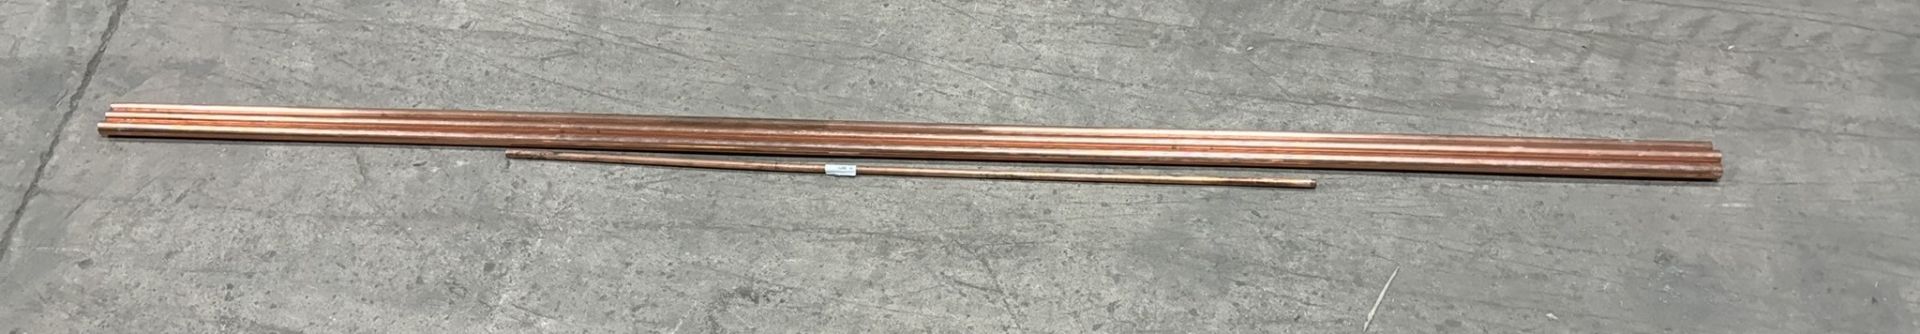 4 x Various Copper Pipes As Seen In Photos